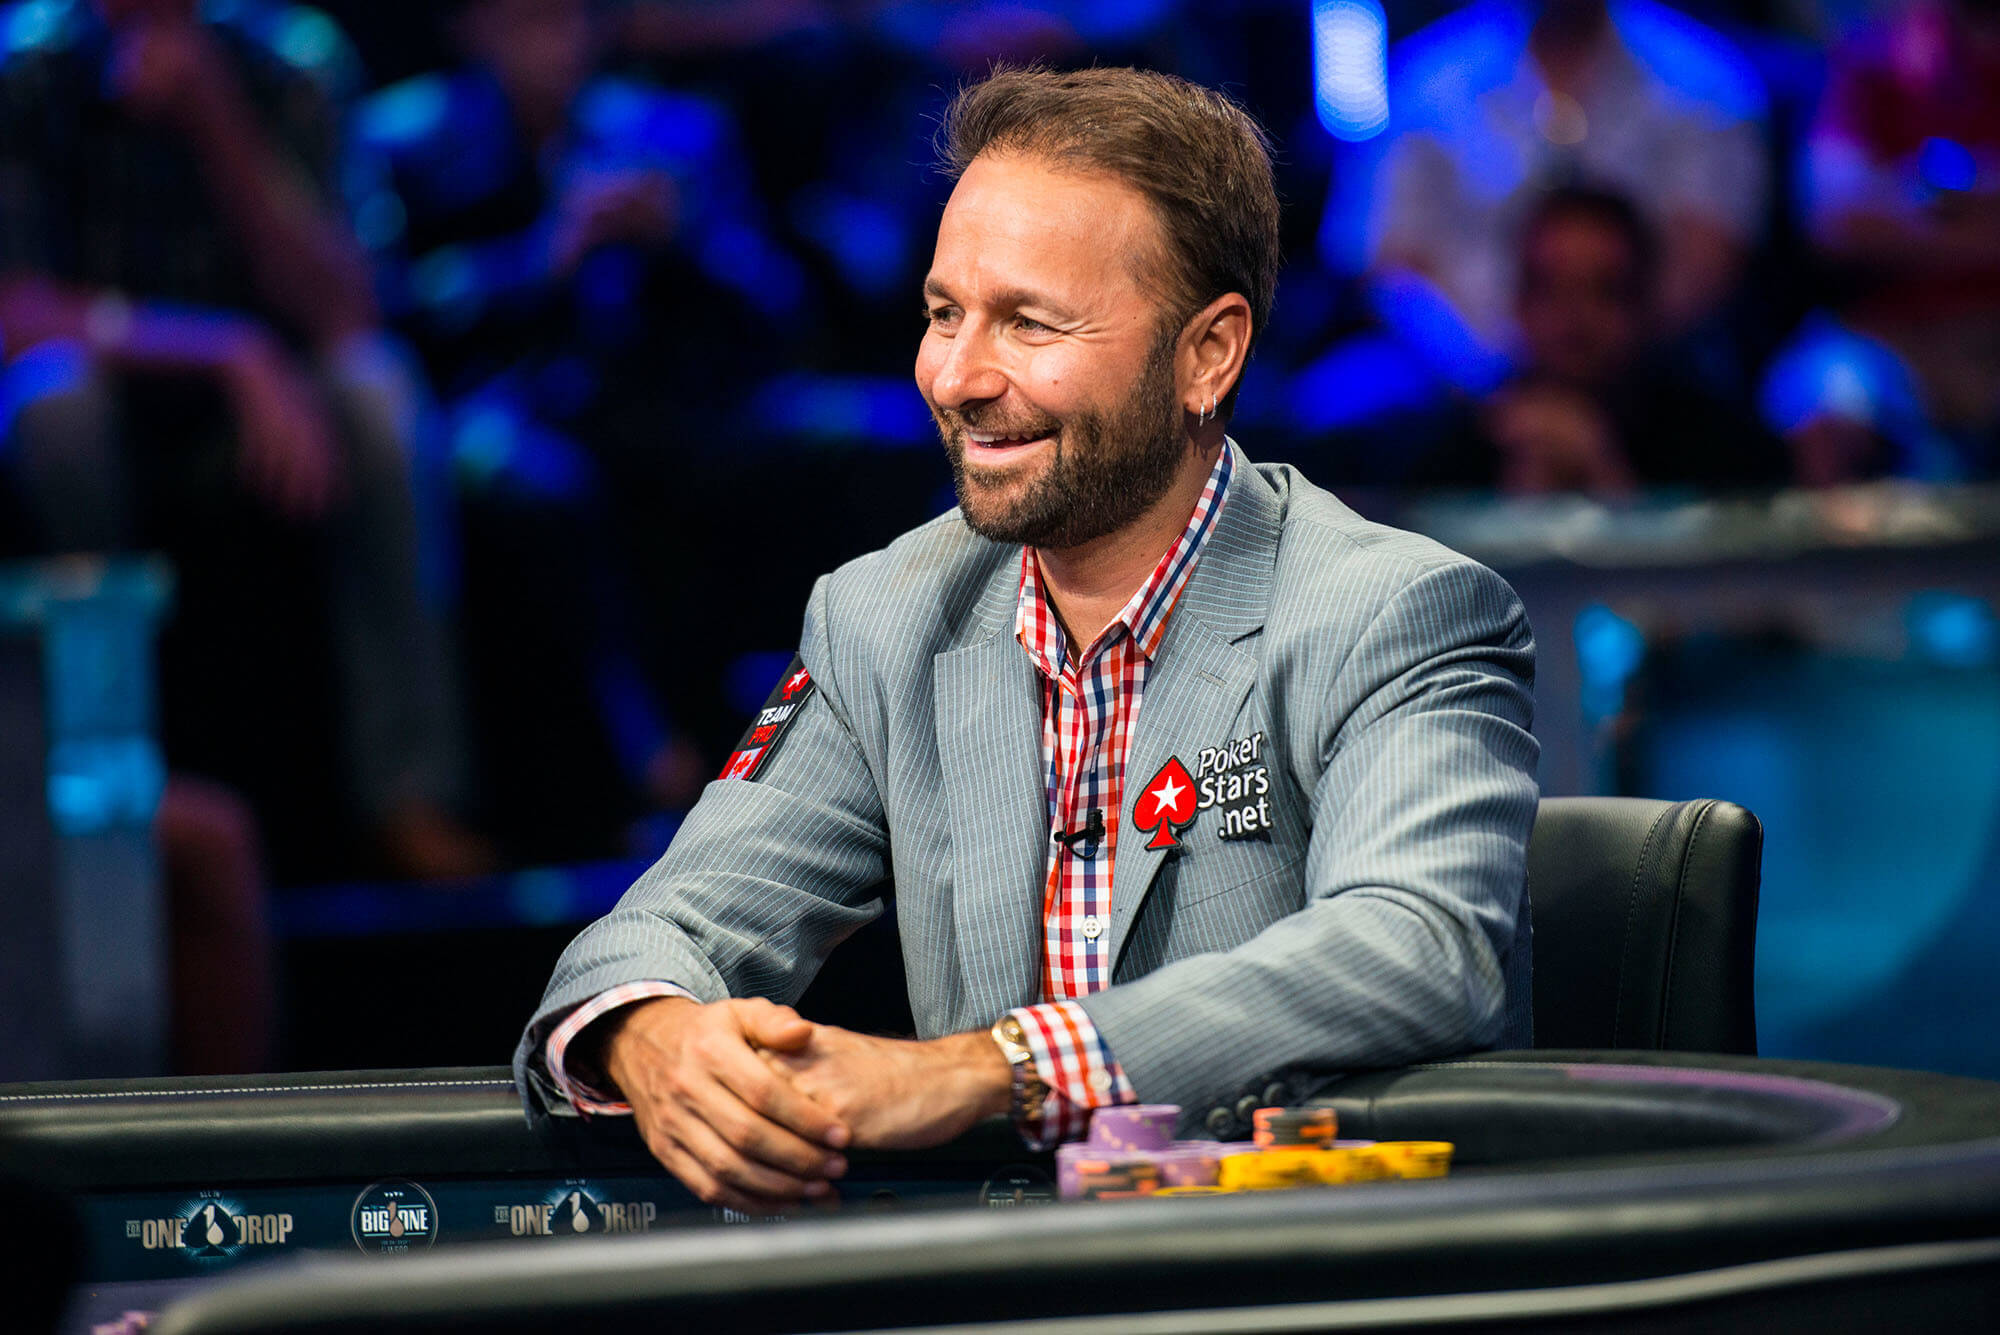 Daniel Negreanu wearing a suit while playing poker